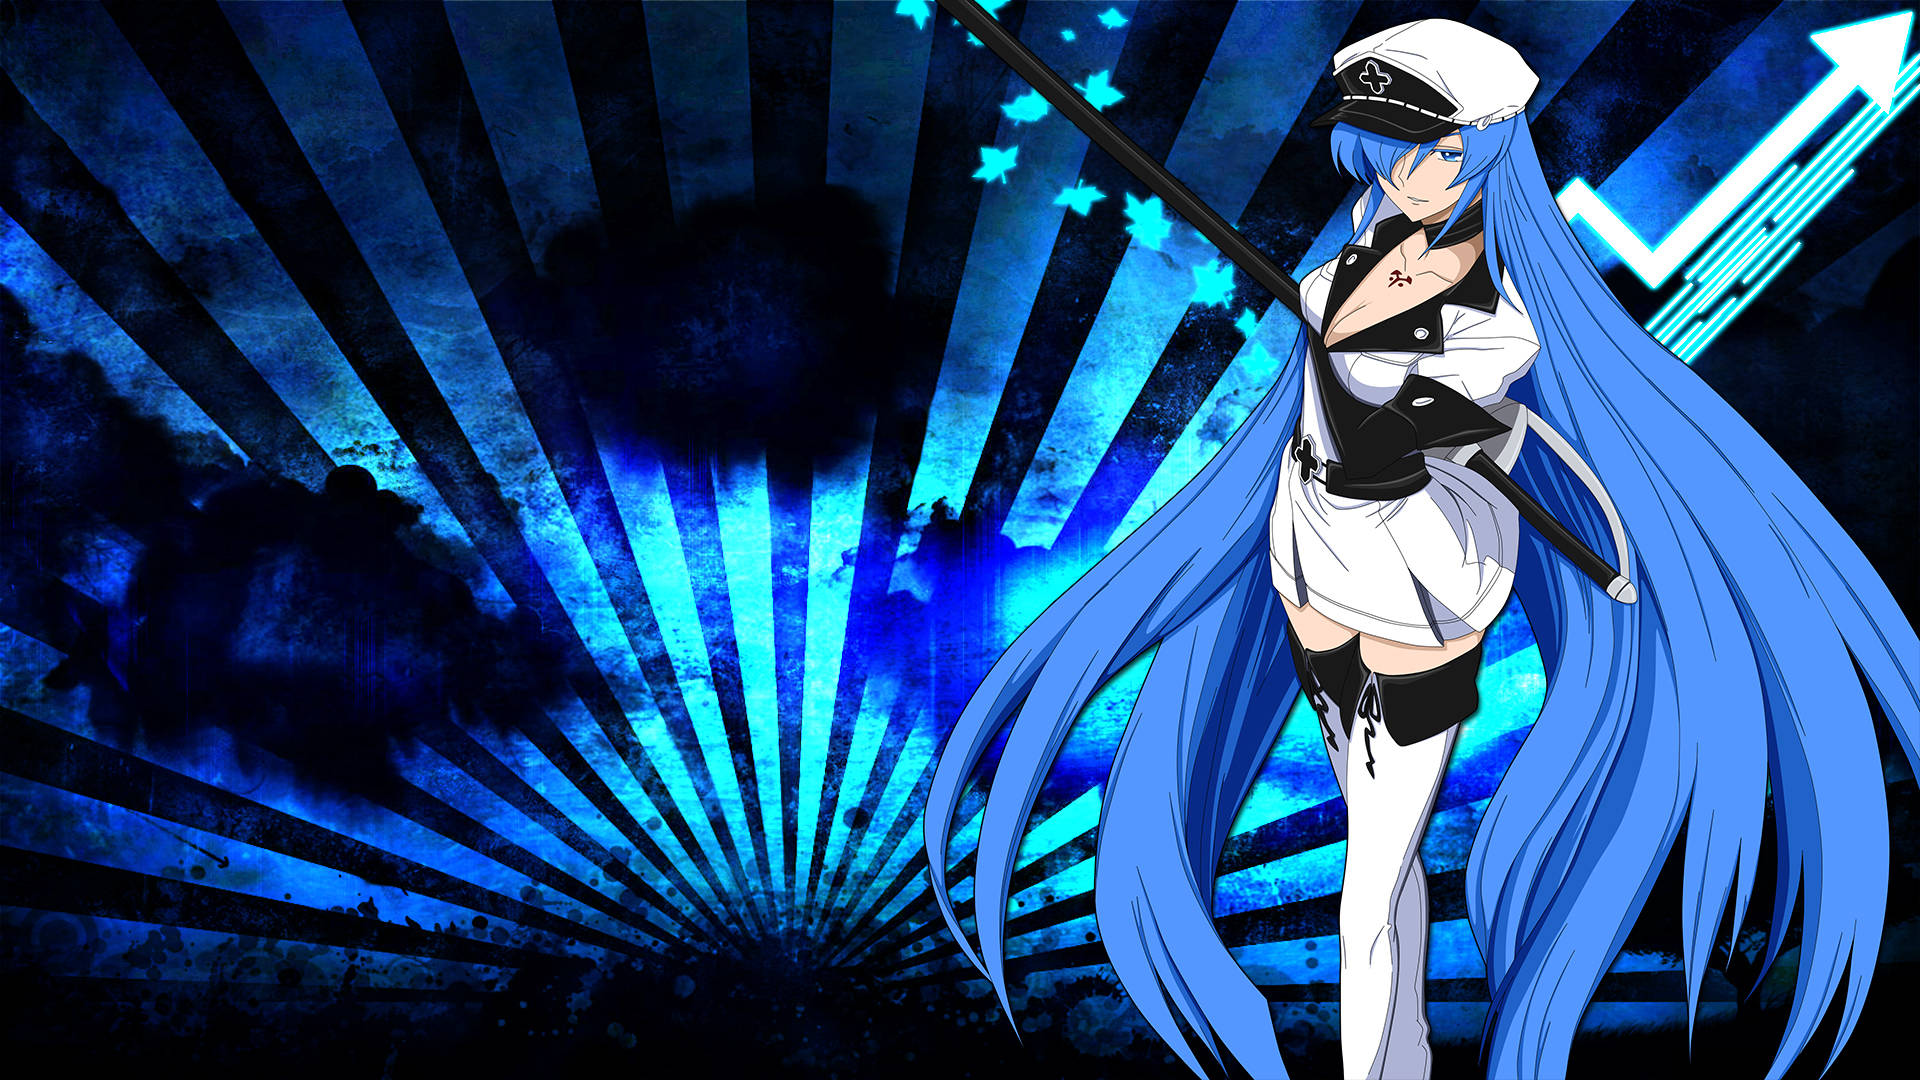 Esdeath With Blue Rays Wallpaper